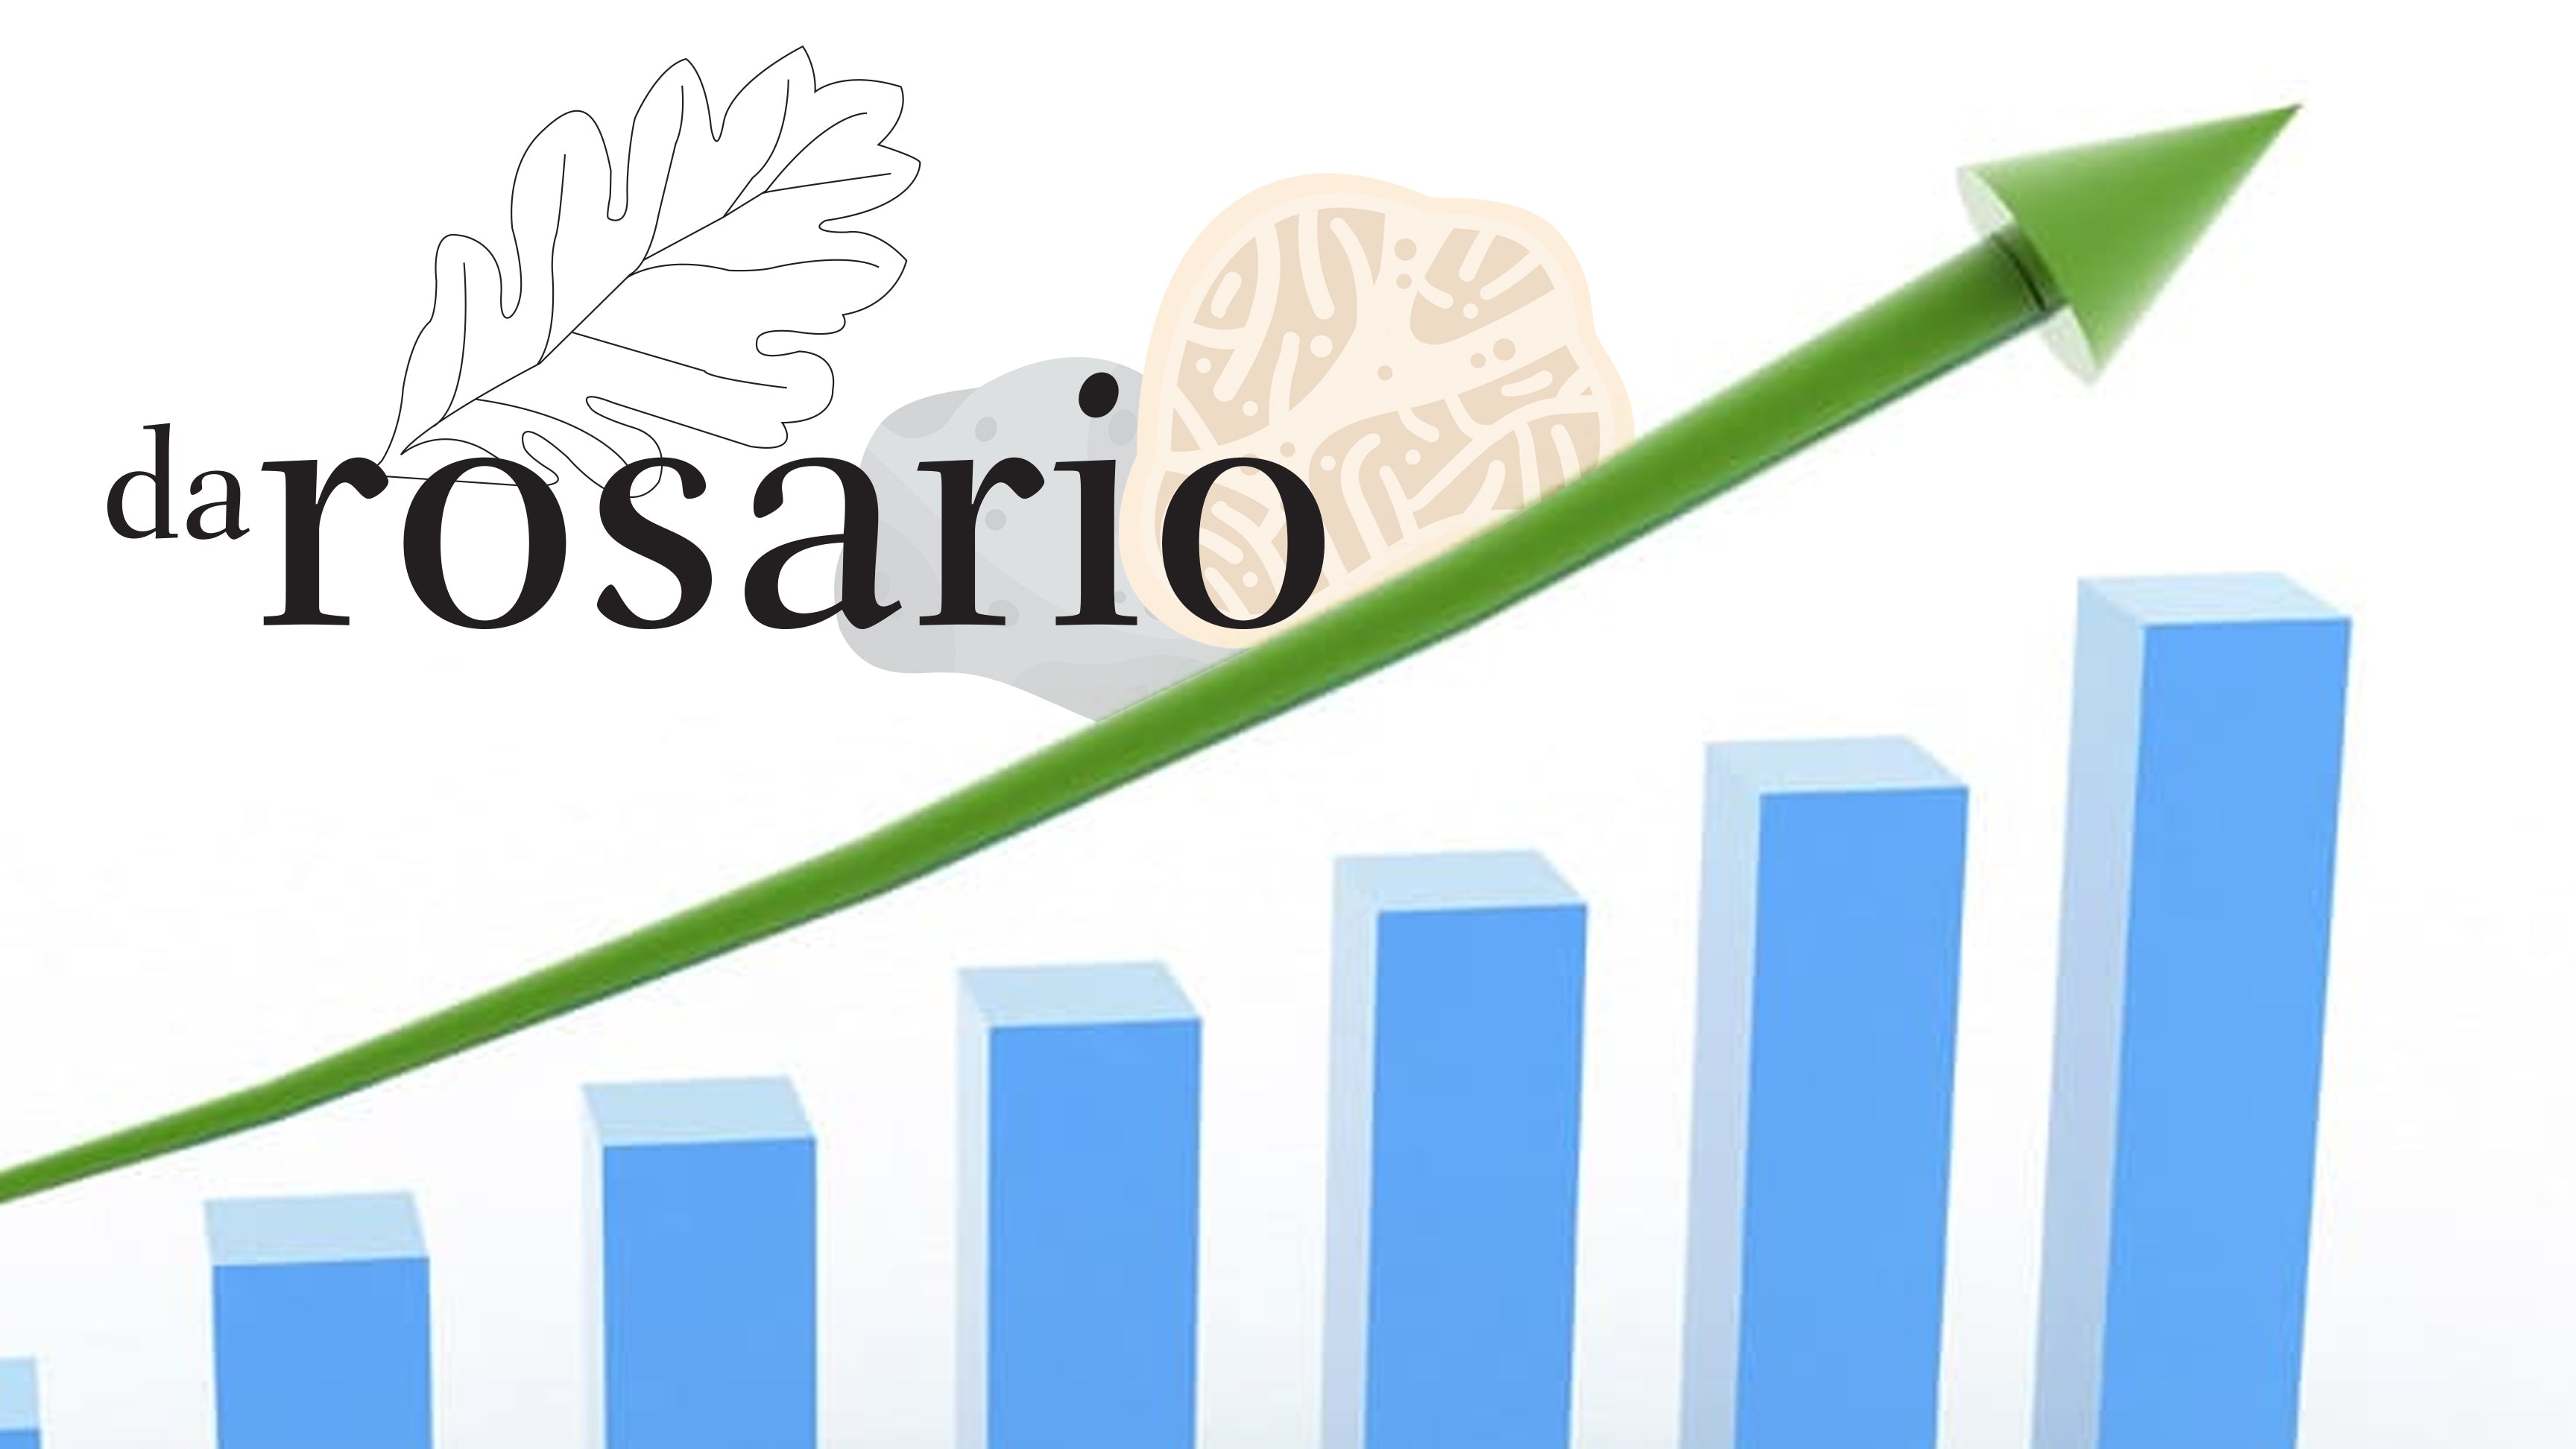 500% Growth in Sales of Da Rosario | USDA 100% Organic Truffle Products Fuels Expansion in 2013